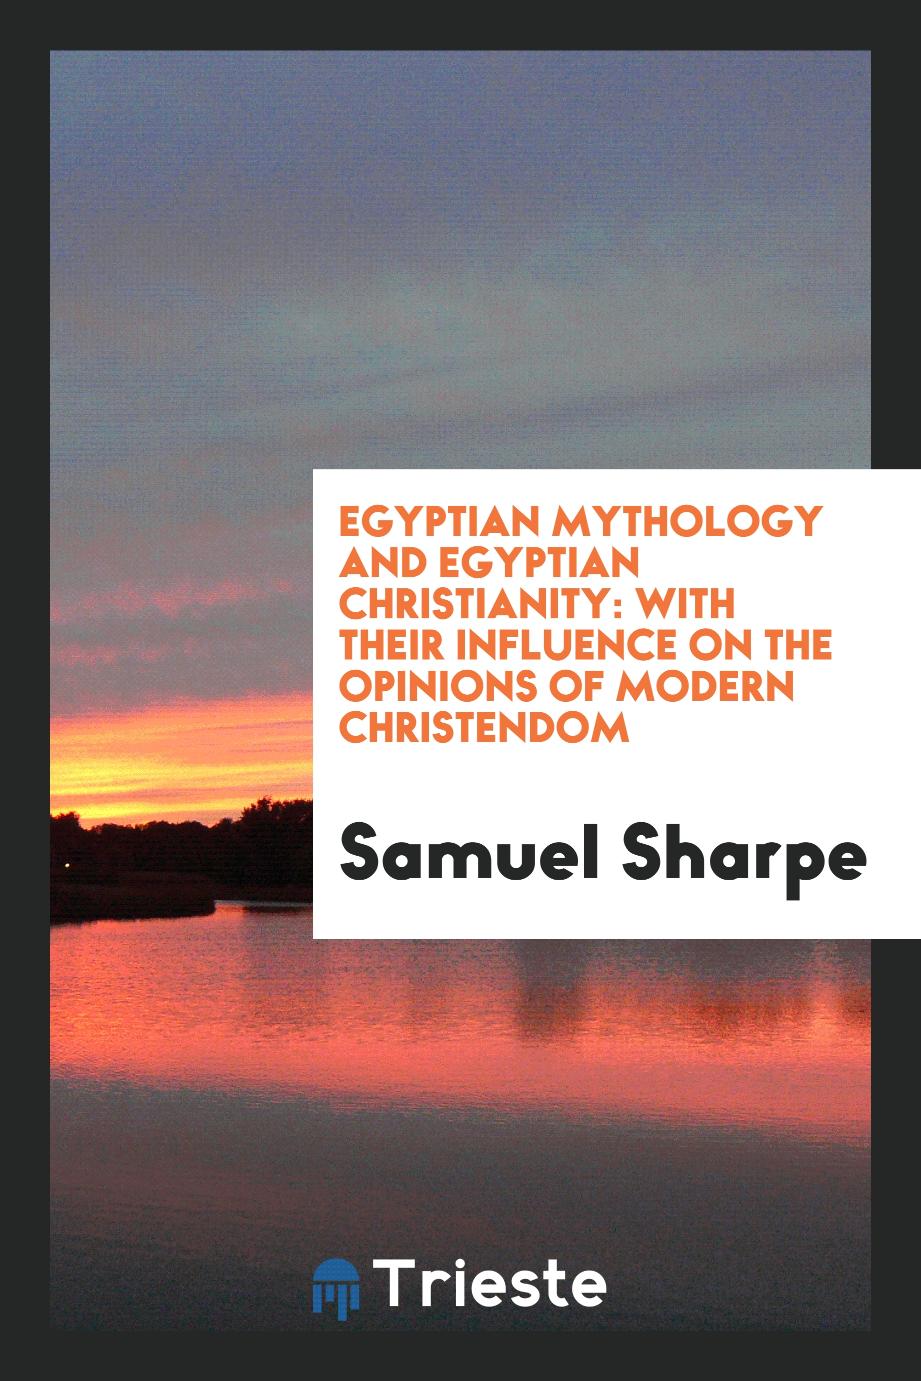 Egyptian Mythology and Egyptian Christianity: With Their Influence on the Opinions of Modern Christendom